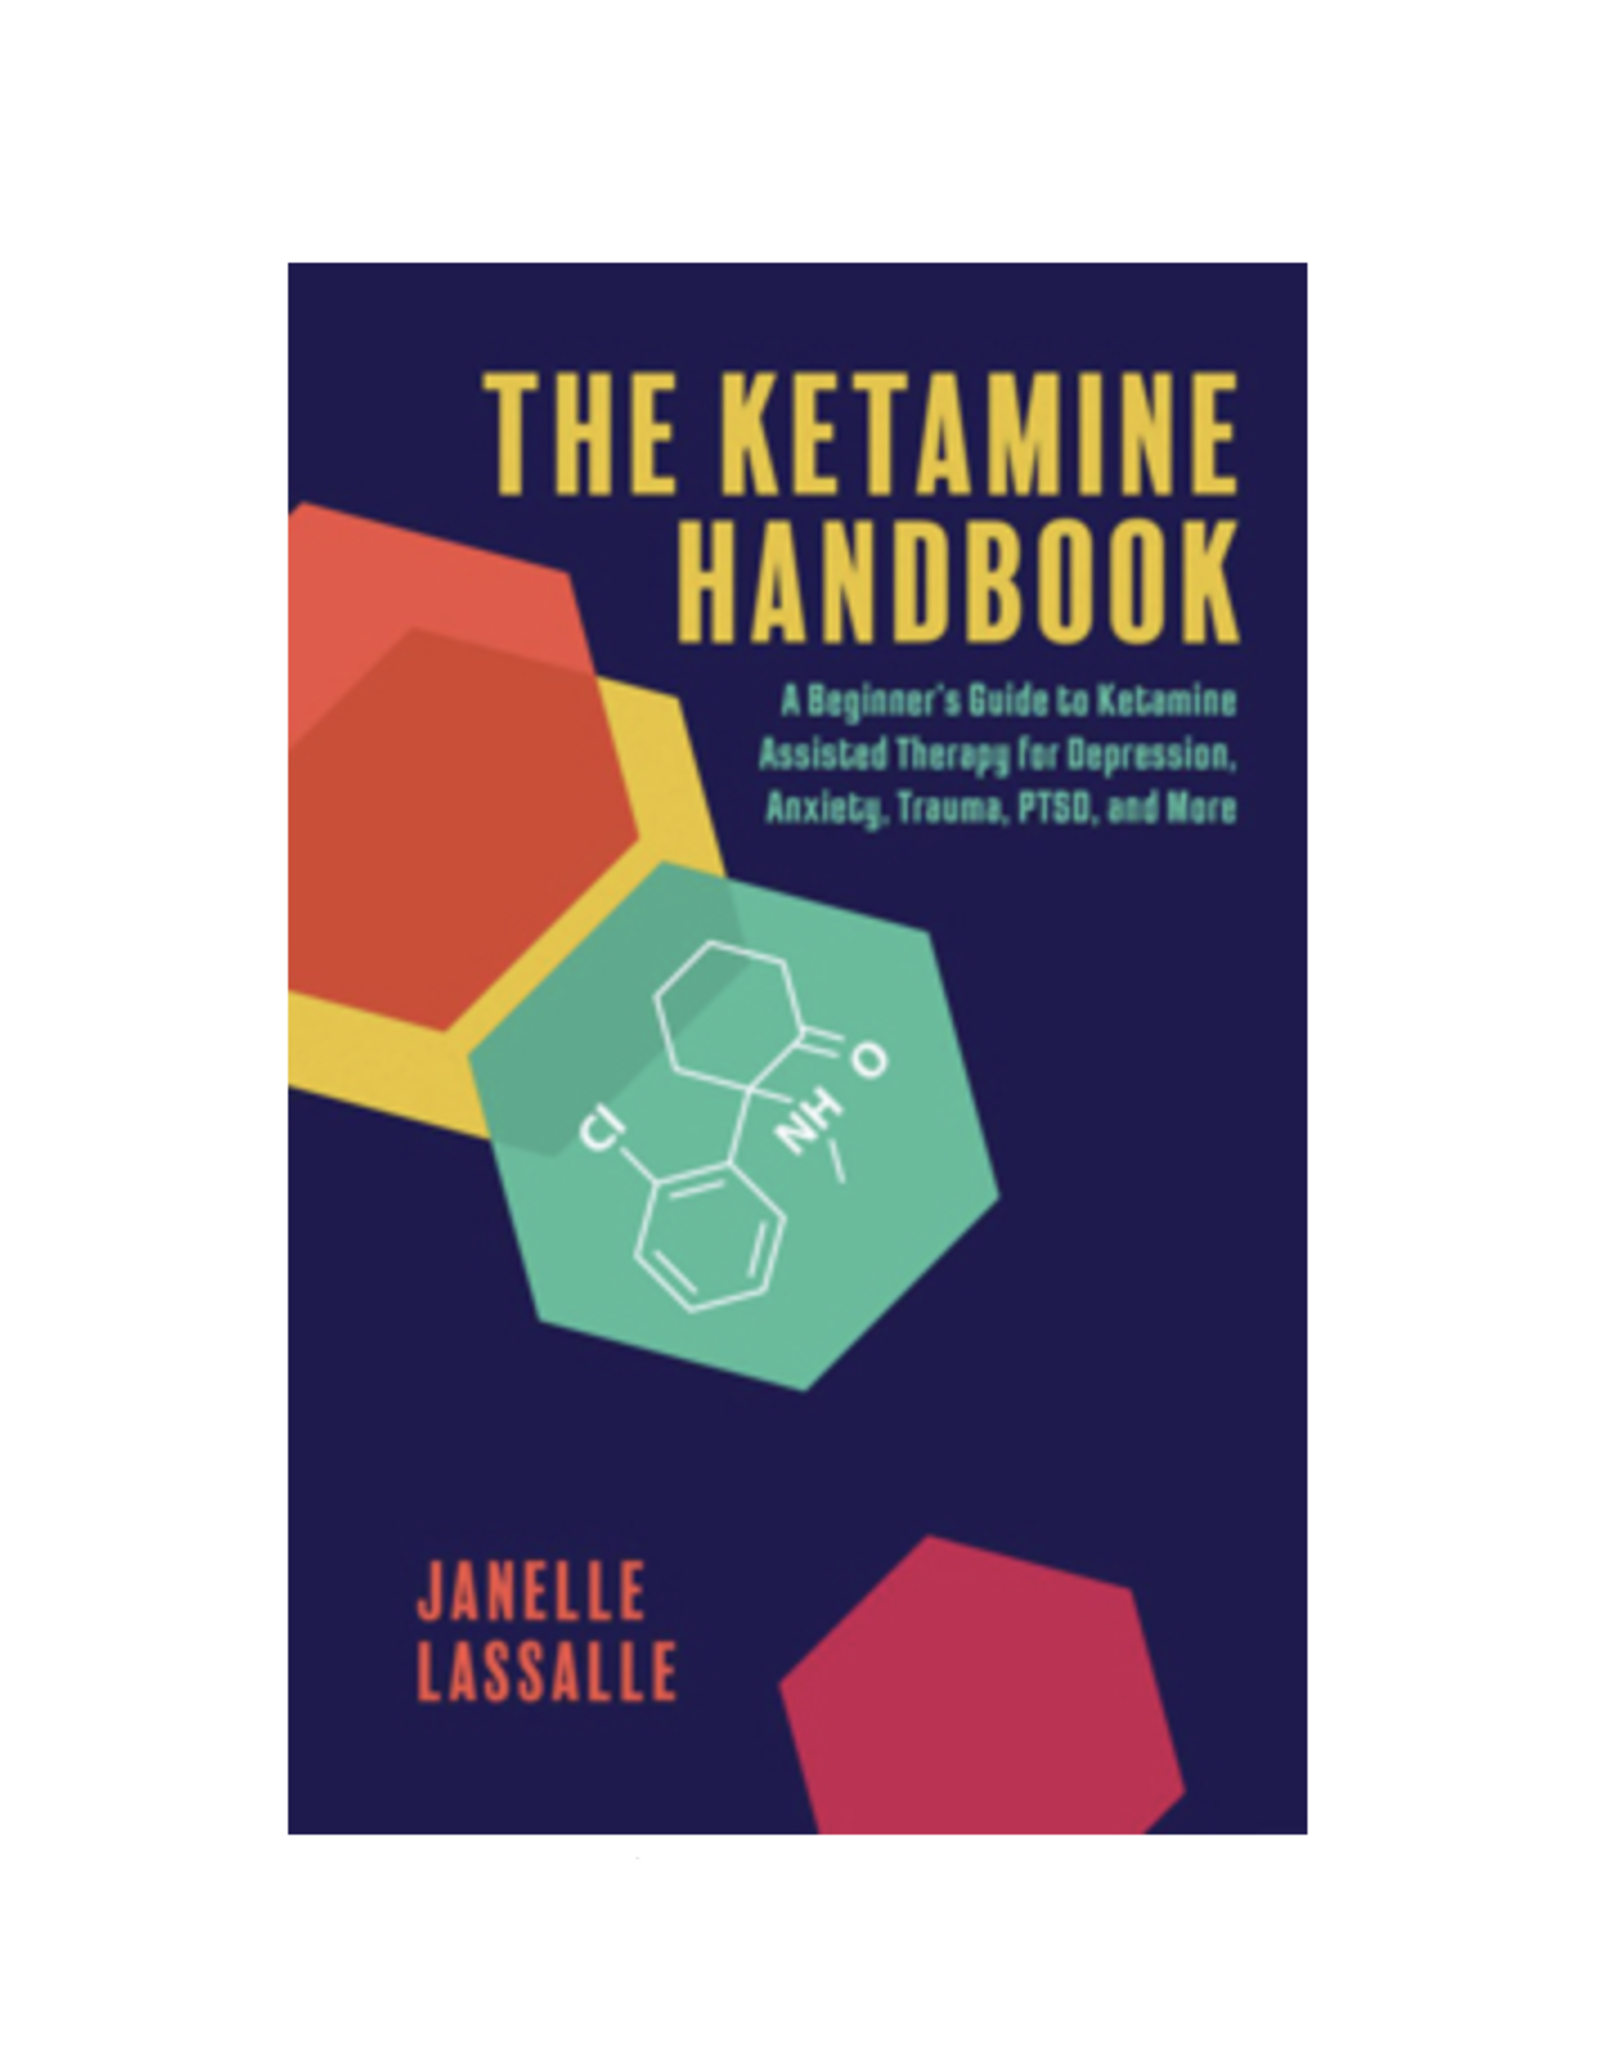 Ketamine Handbook - A Beginner's Guide to Ketamine-Assisted Therapy for Depression, Anxiety, Trauma, PTSD, and More